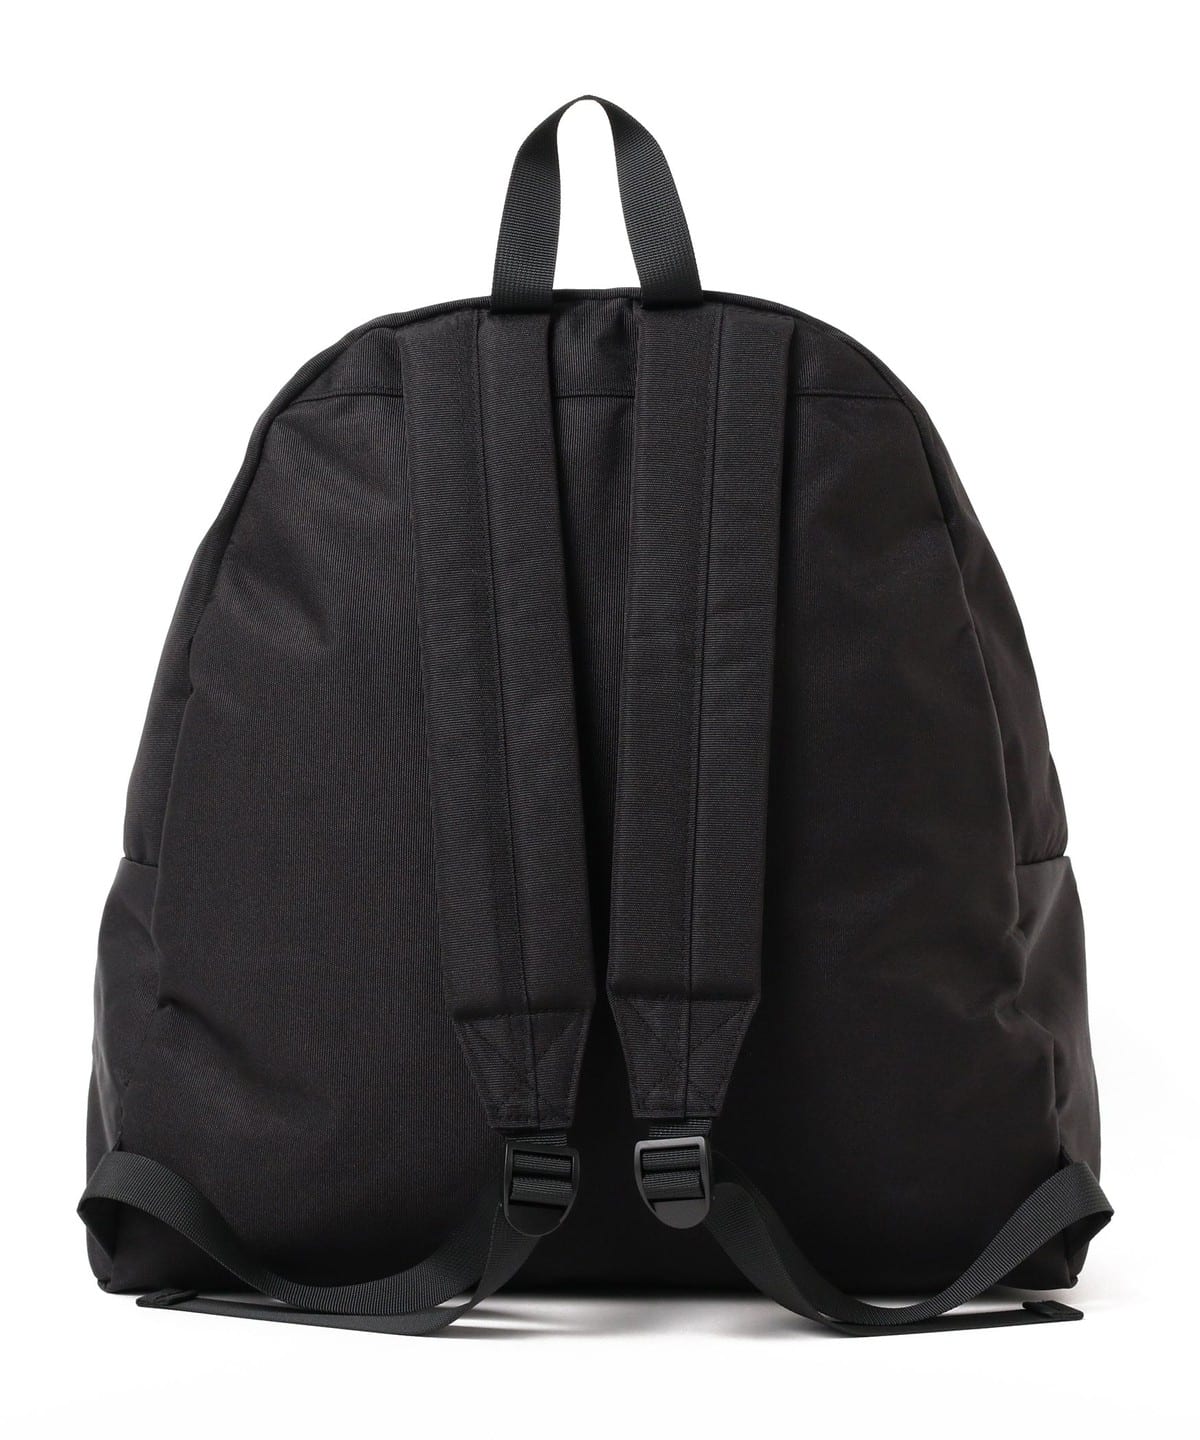 B:MING by BEAMS（ビーミング by ビームス）PACKING / BACKPACK ...